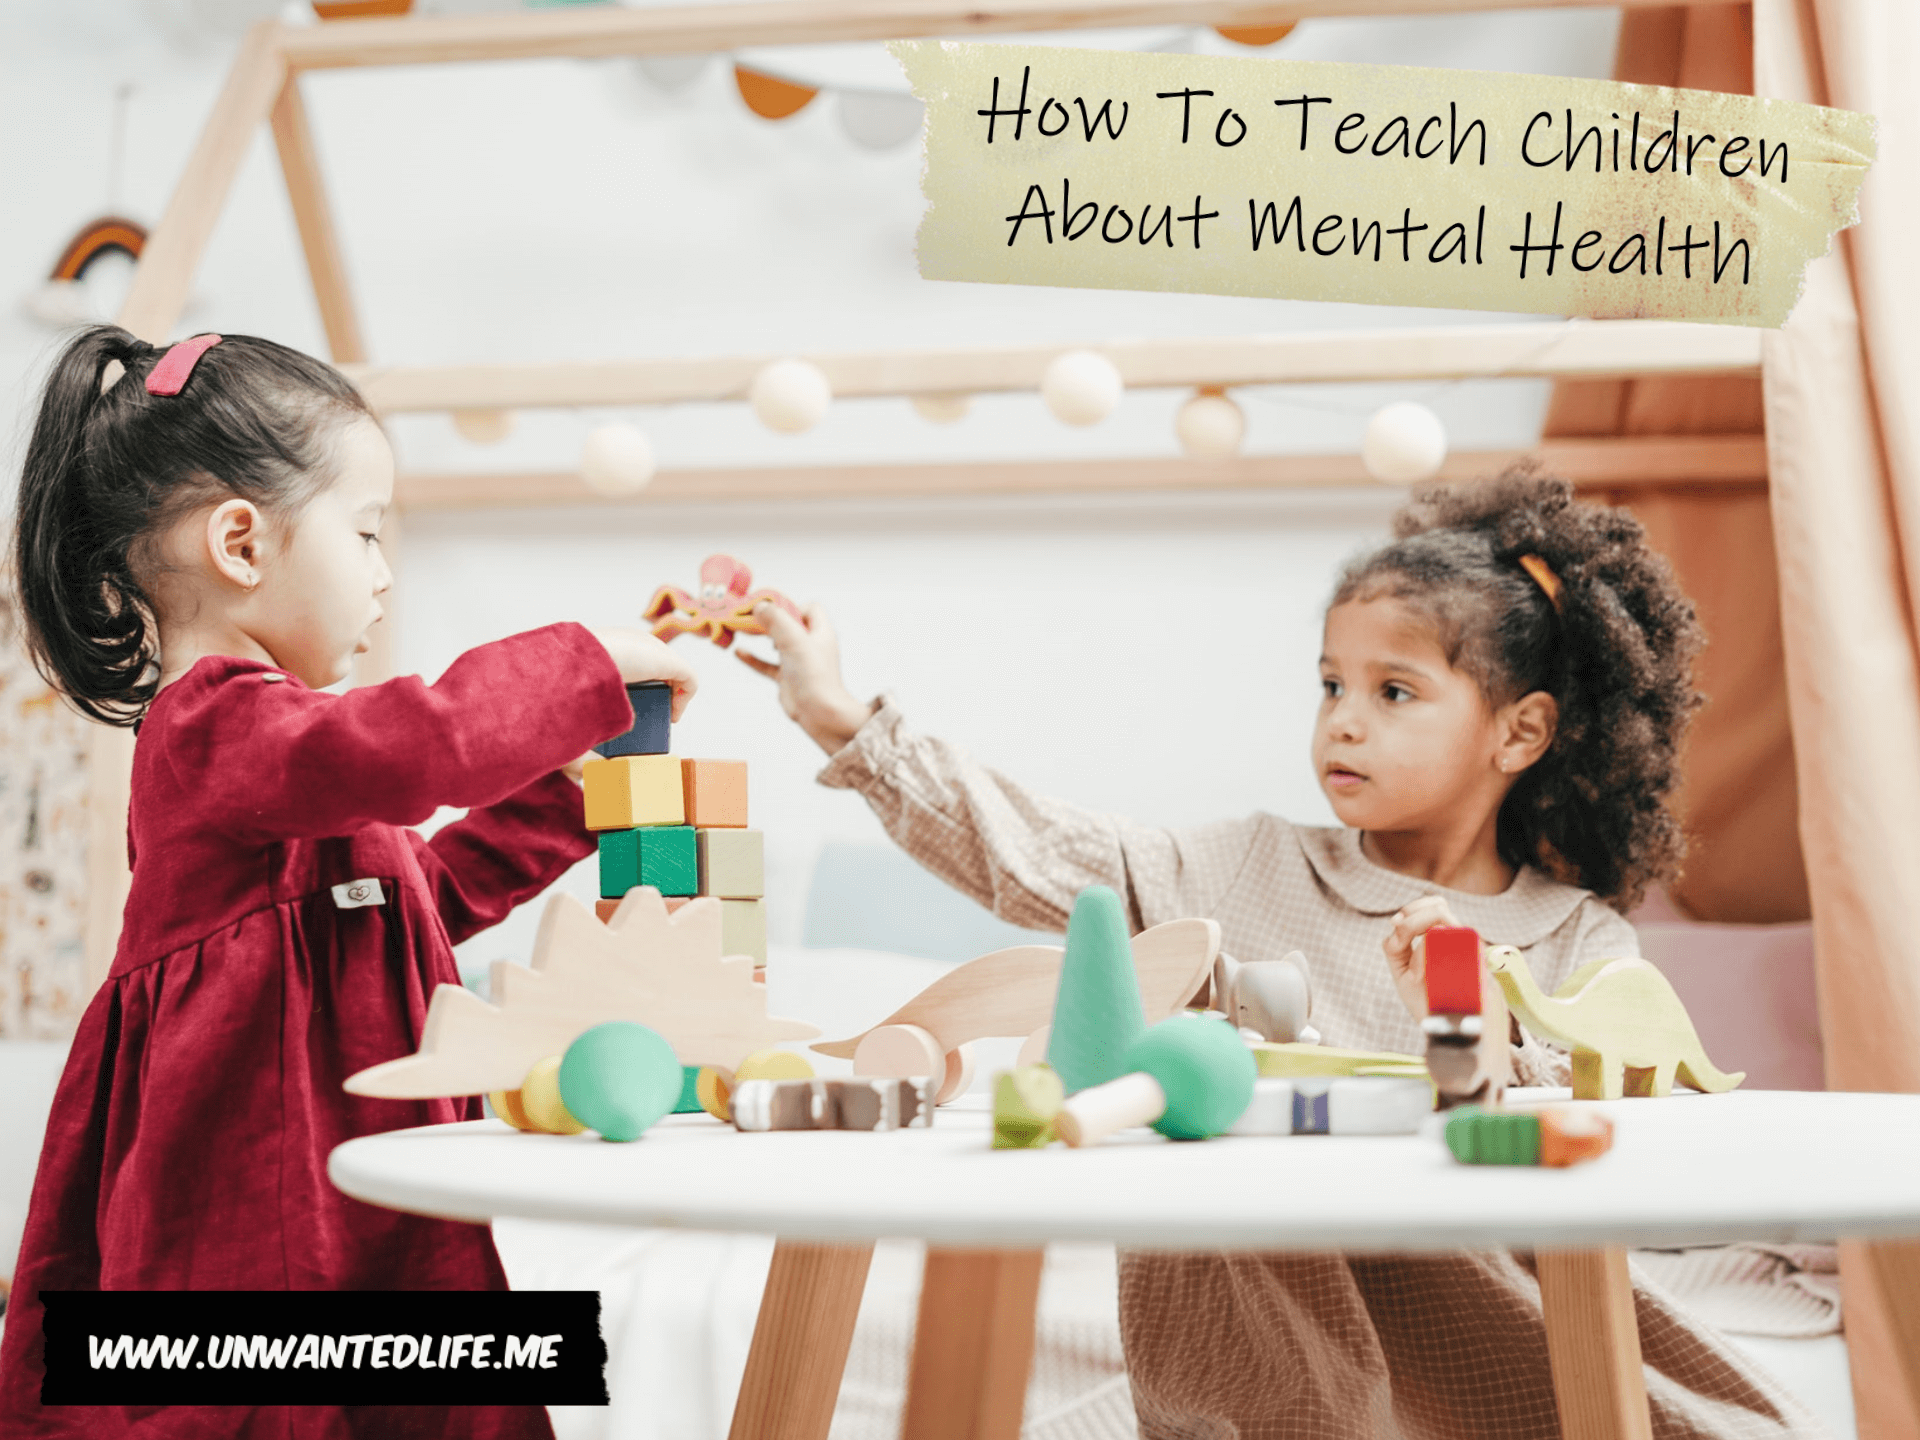 A photo of a little black girl and a little east Asian girl playing together around a table to represent the topic of the article - How To Teach Children About Mental Health